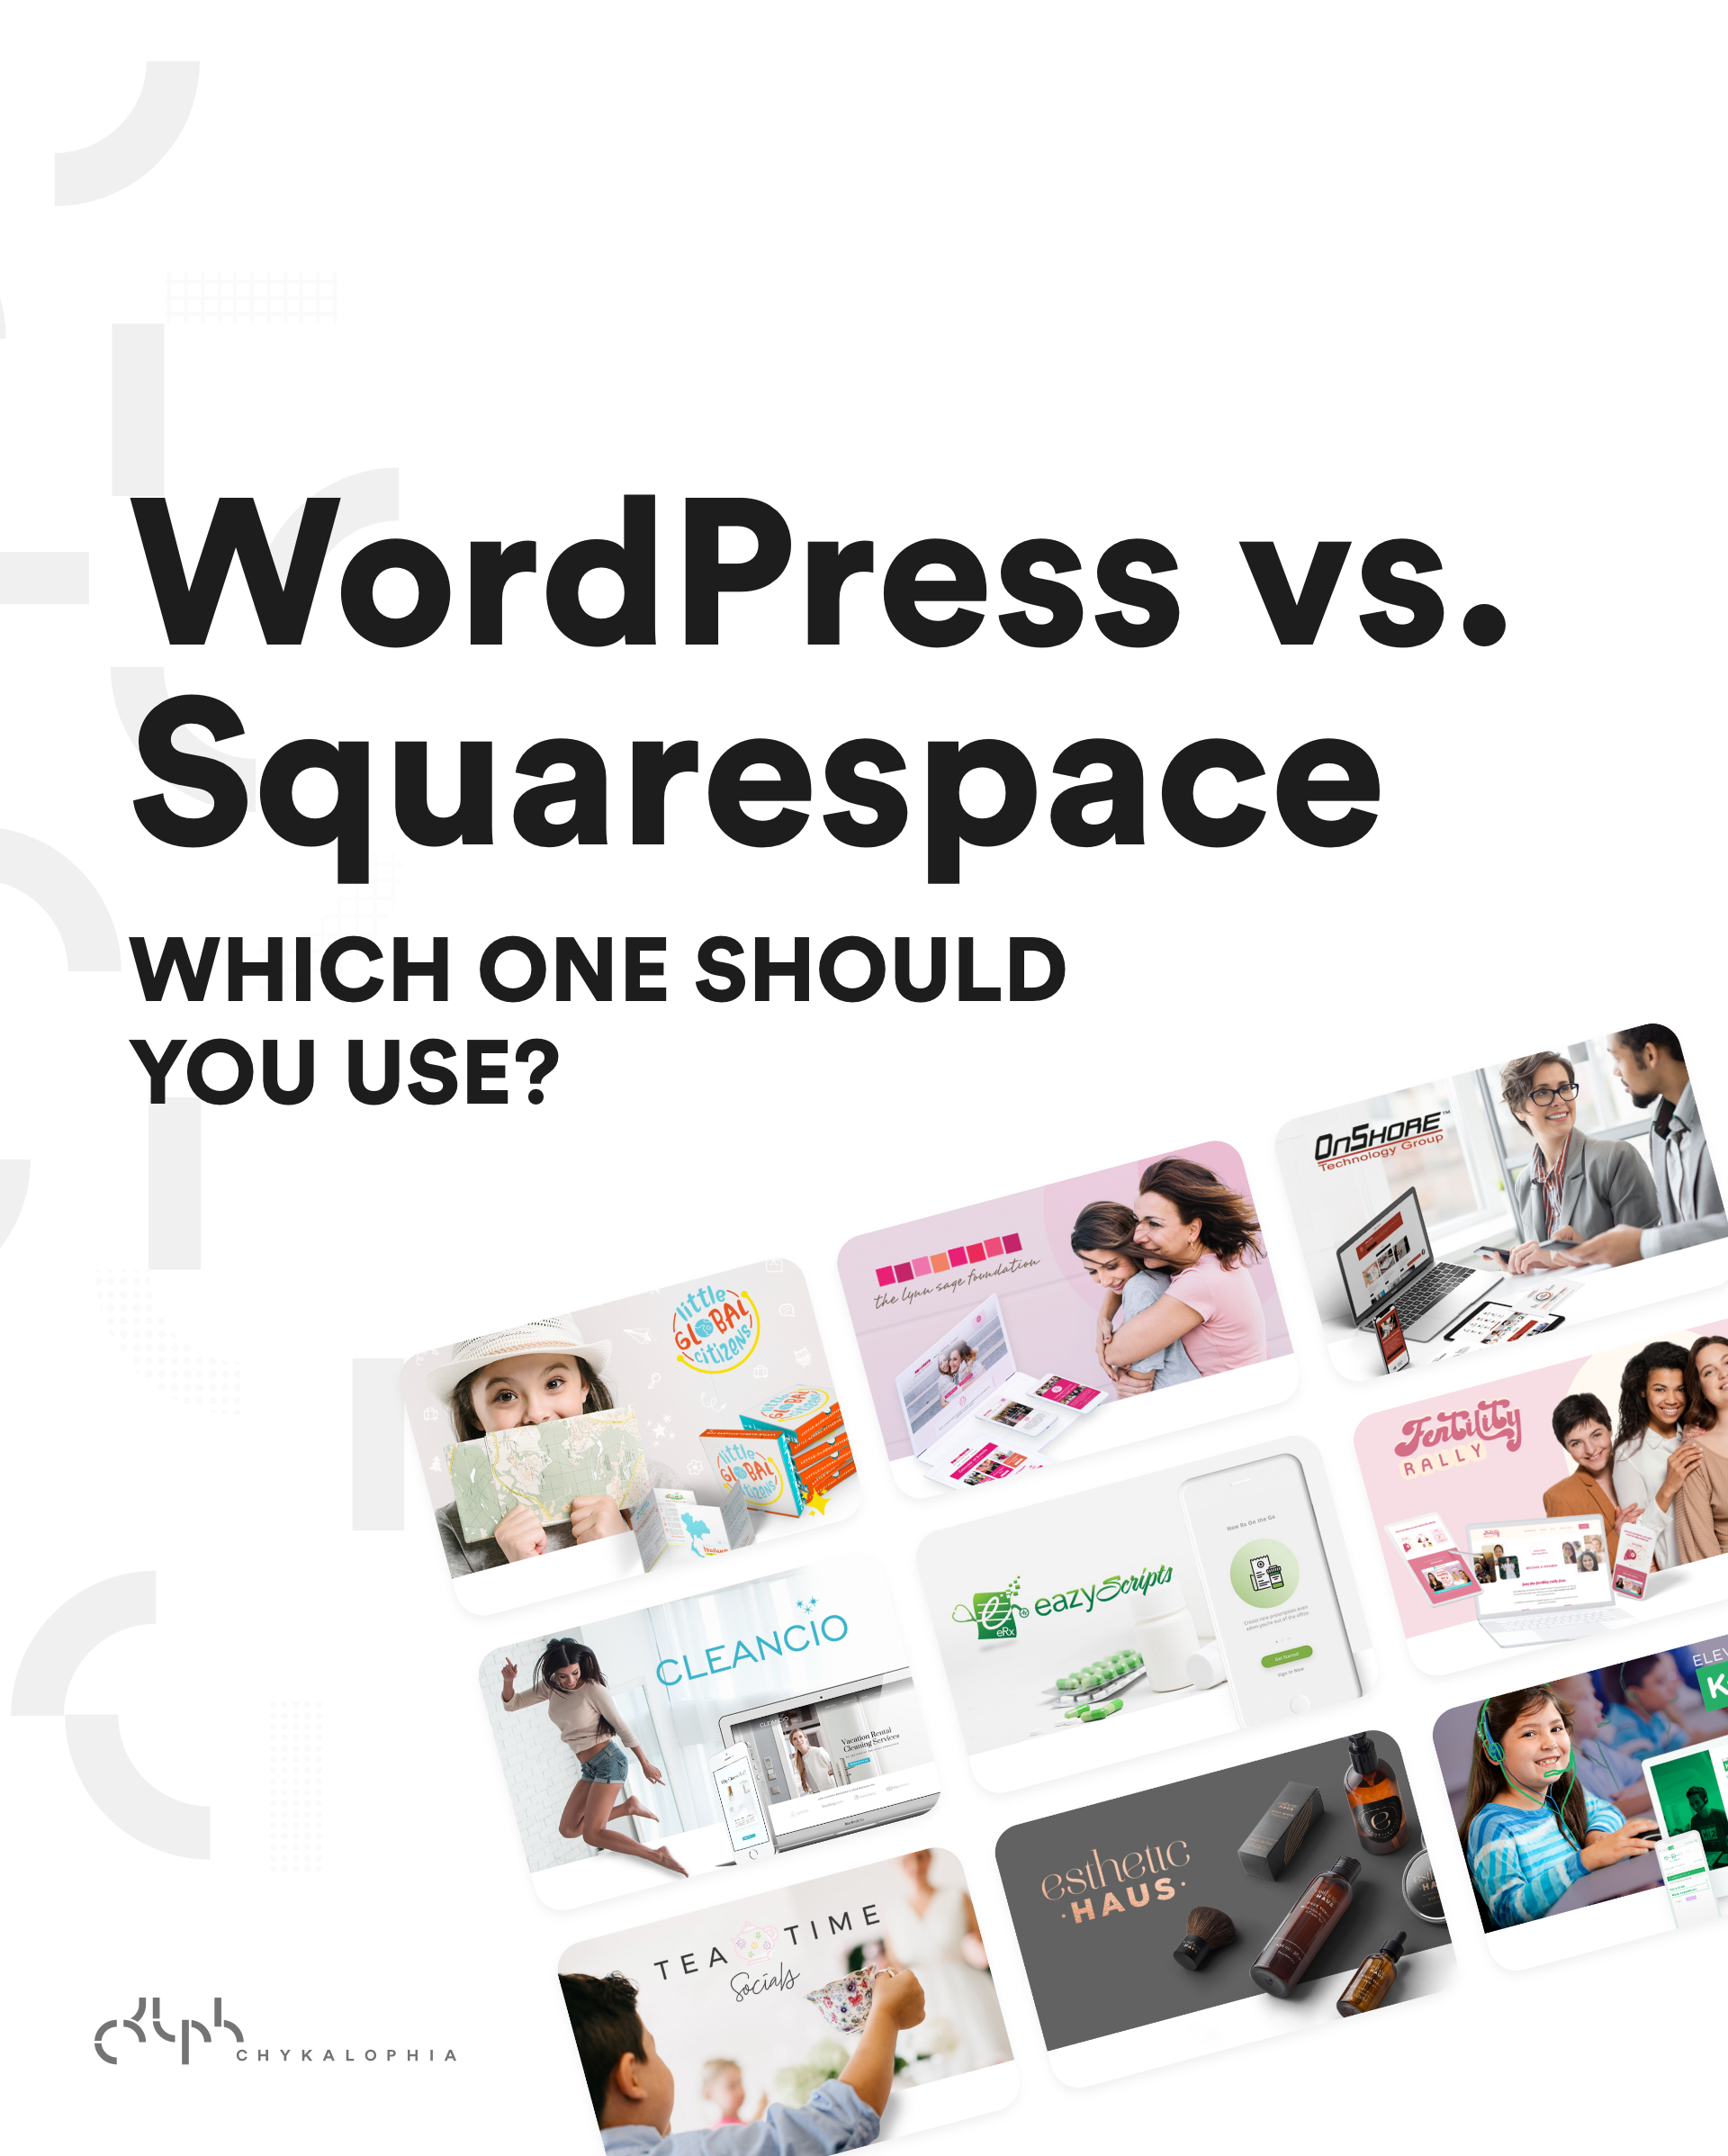 Wordpress vs. Squarespace: How to choose the right web platform for your business